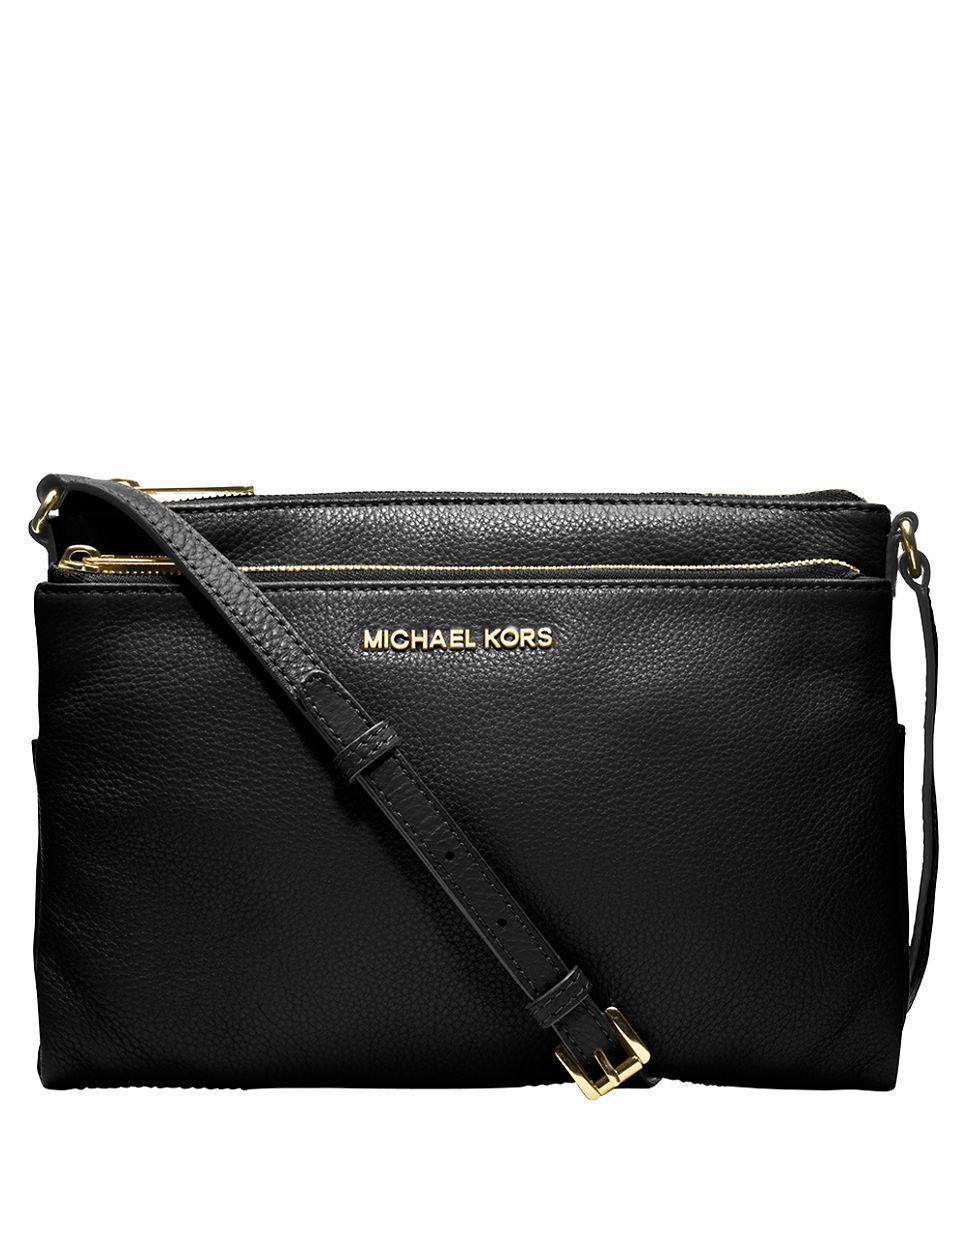 MICHAEL Michael Kors Bedford Leather Extra Large Crossbody Bag in Black - Lyst